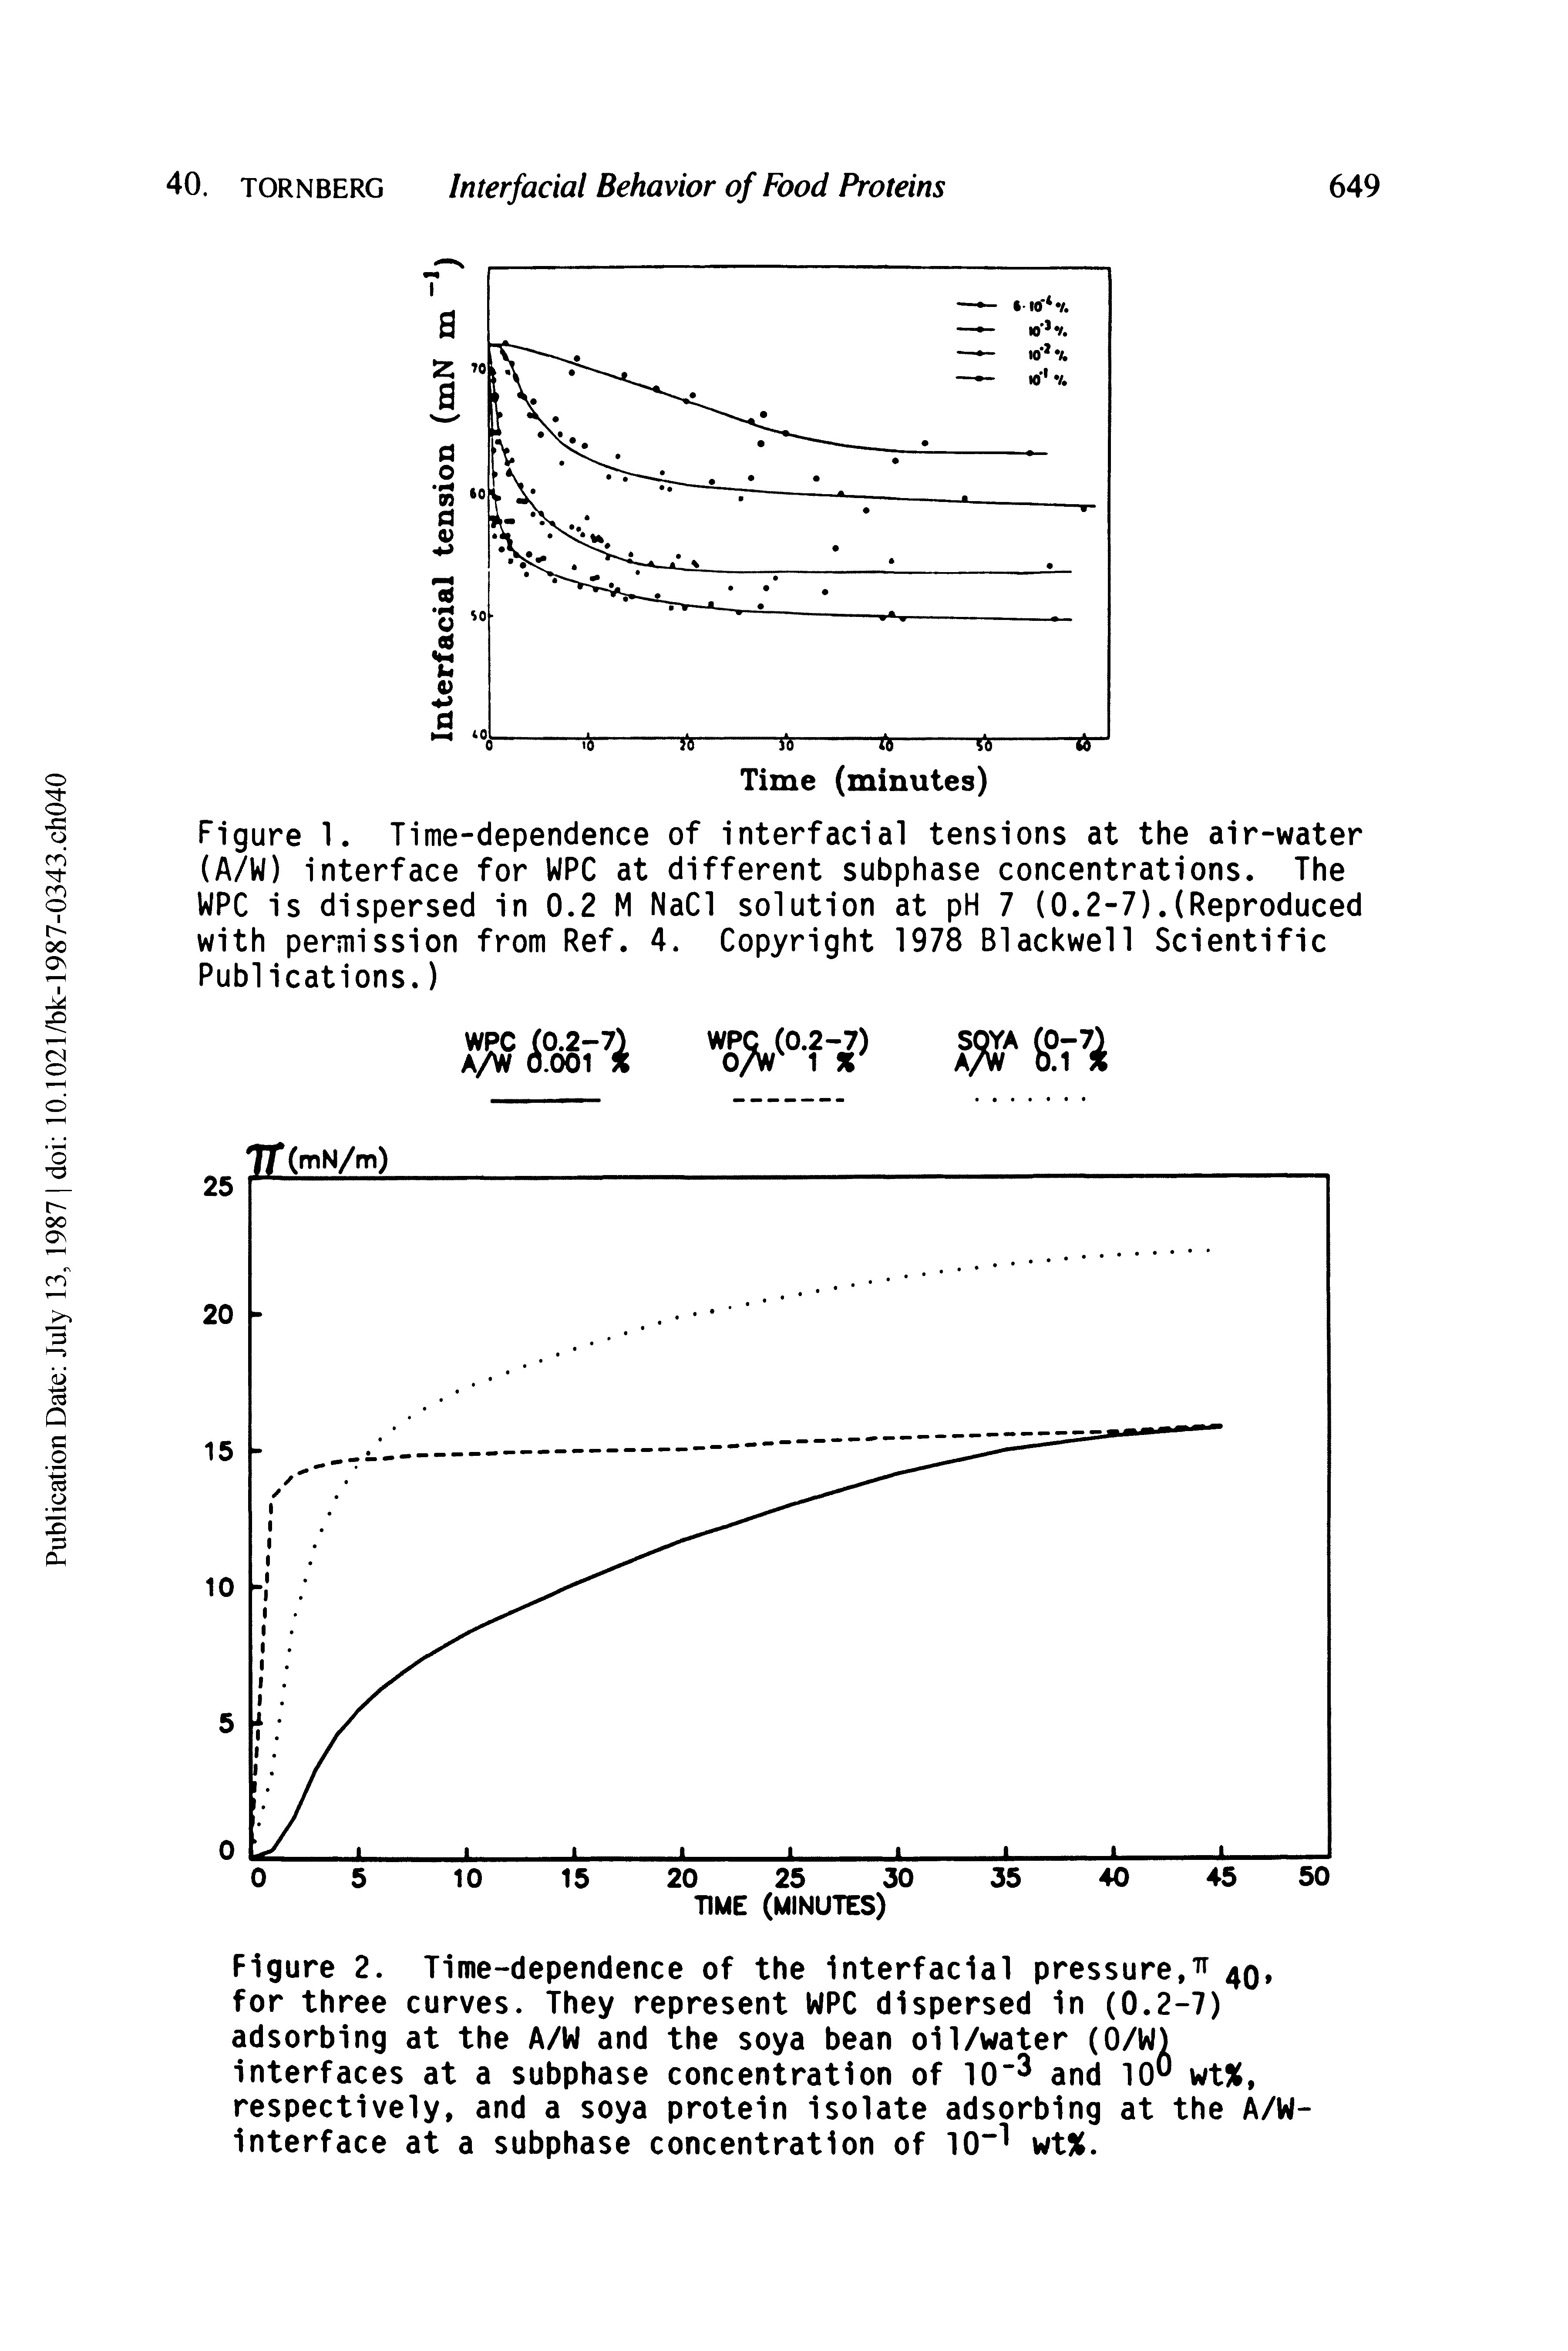 Figure 2. Time-dependence of the interfacial pressure, 49, for three curves. They represent WPC dispersed in (0.2-7) adsorbing at the A/W and the soya bean oil/water (0/W) interfaces at a subphase concentration of 10" and 10 wt%, respectively, and a soya protein isolate adsorbing at the A/W-interface at a subphase concentration of 10 wt%.